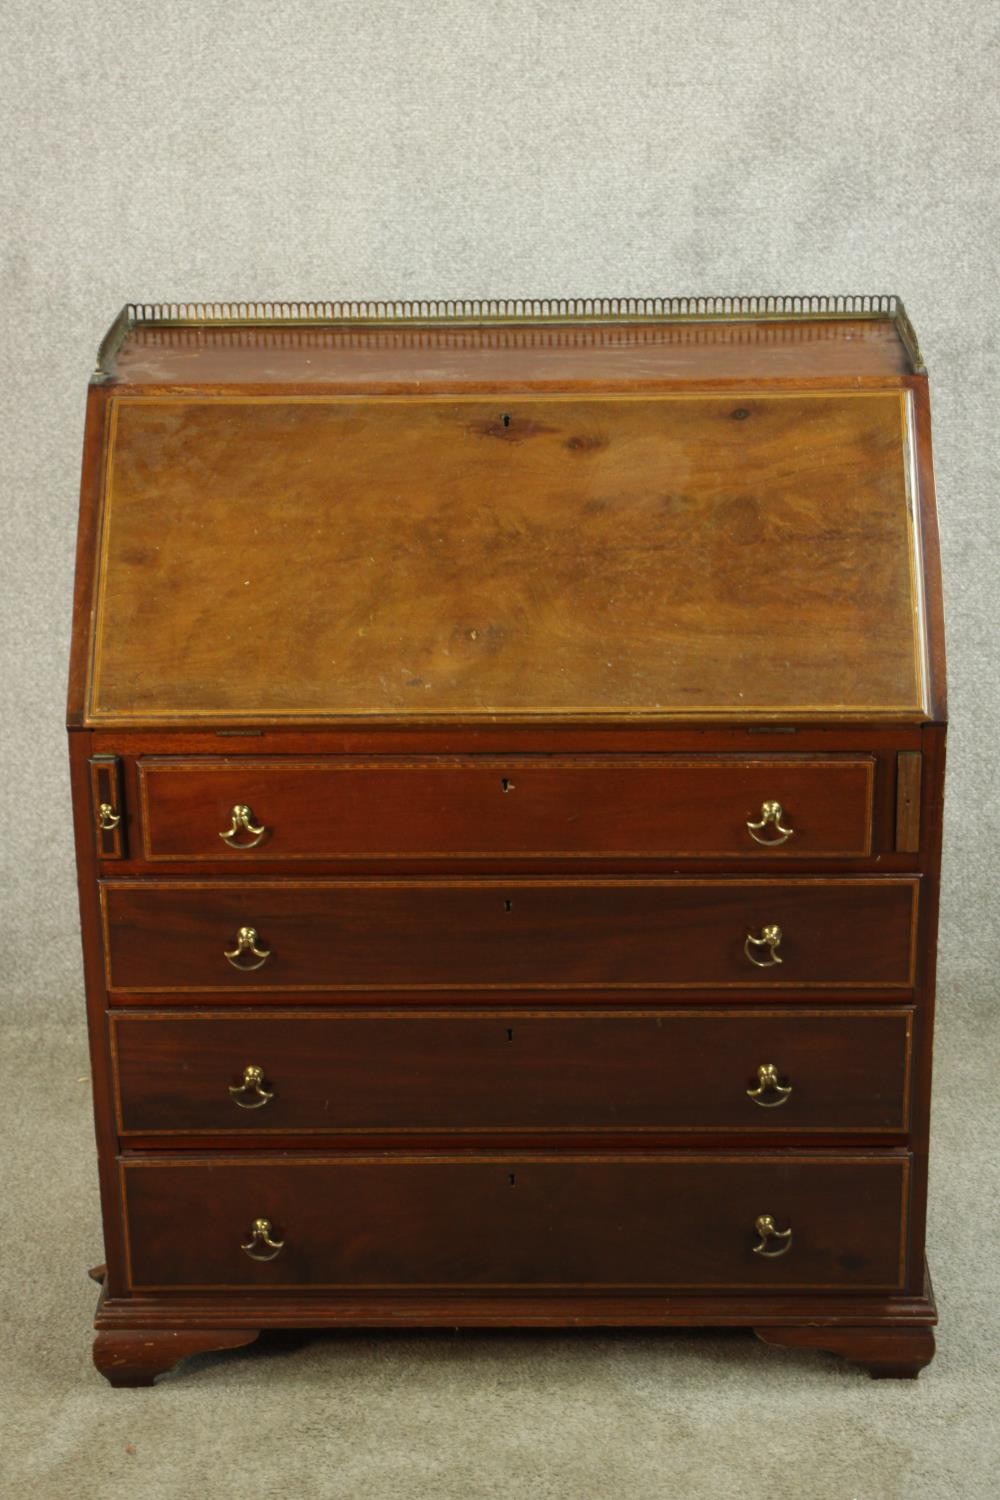 An Edwardian inlaid mahogany fall front writing bureau, with brass pierced gallery, the fall front